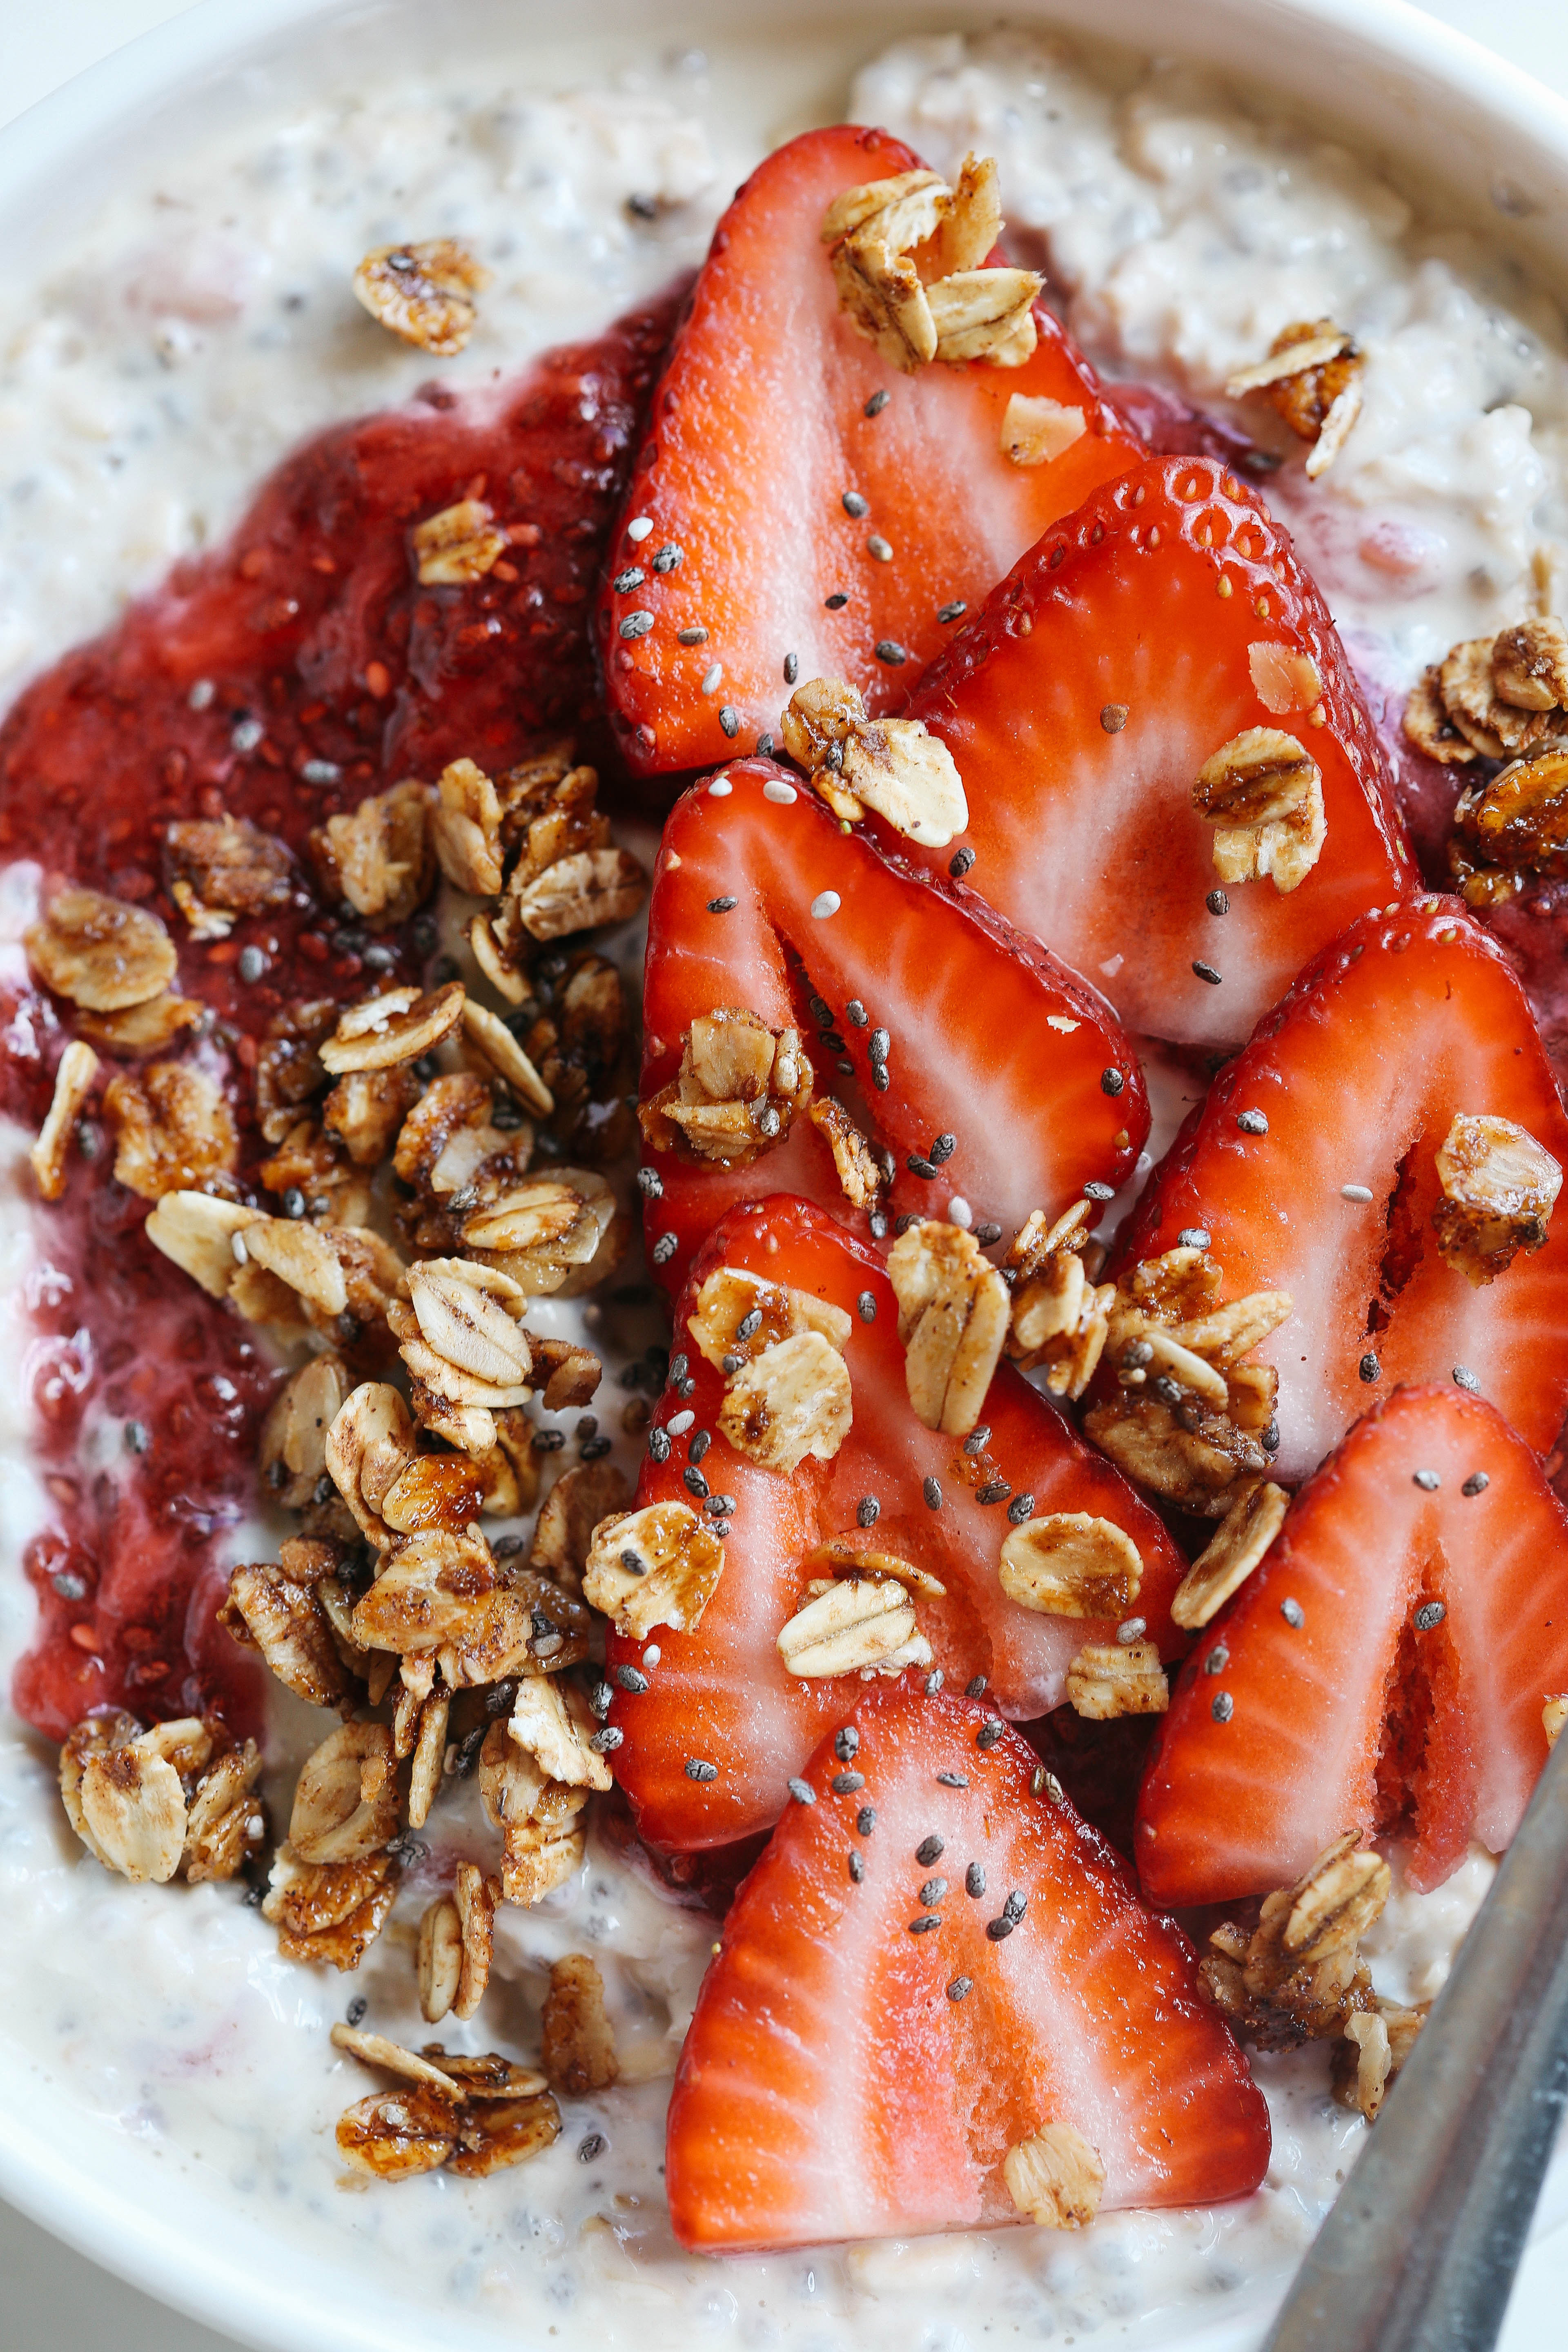 These Strawberry Chia Overnight Oats with homemade chia seed jam are easily made in just minutes the night before giving you a delicious healthy breakfast to enjoy as soon as you wake up! 